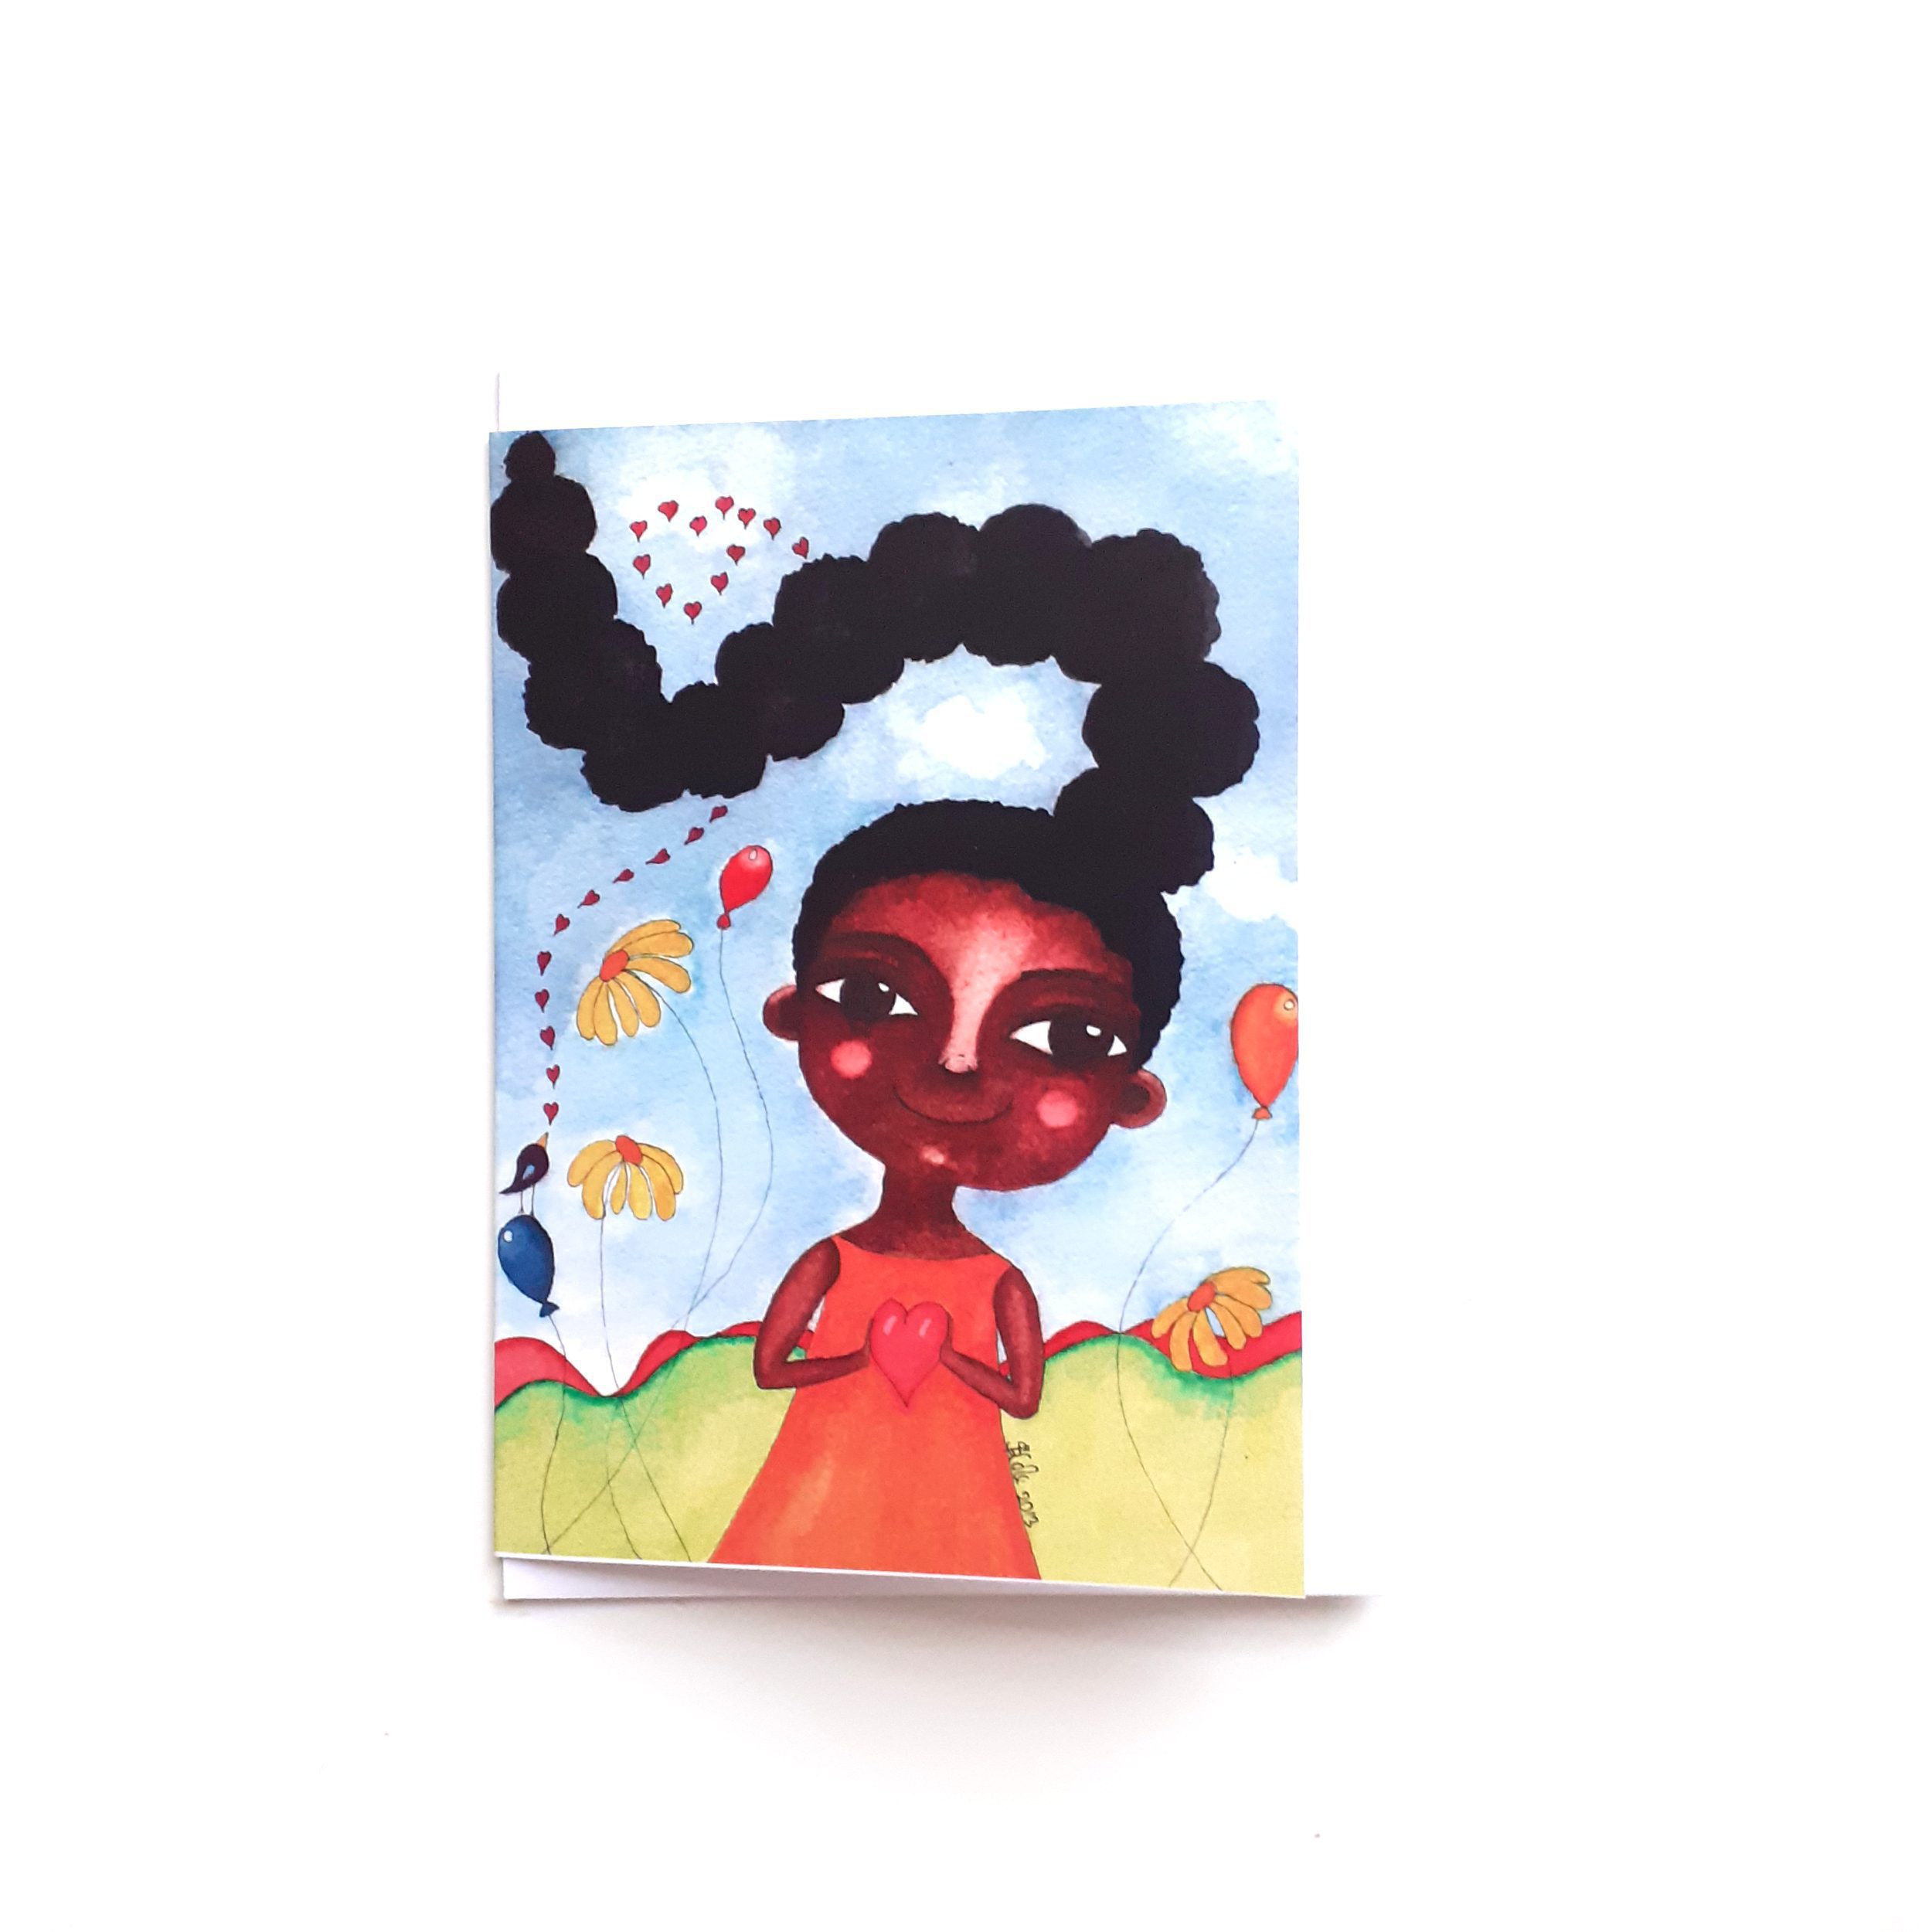 I Love My Hair Greeting Card by Stacey-Ann Cole